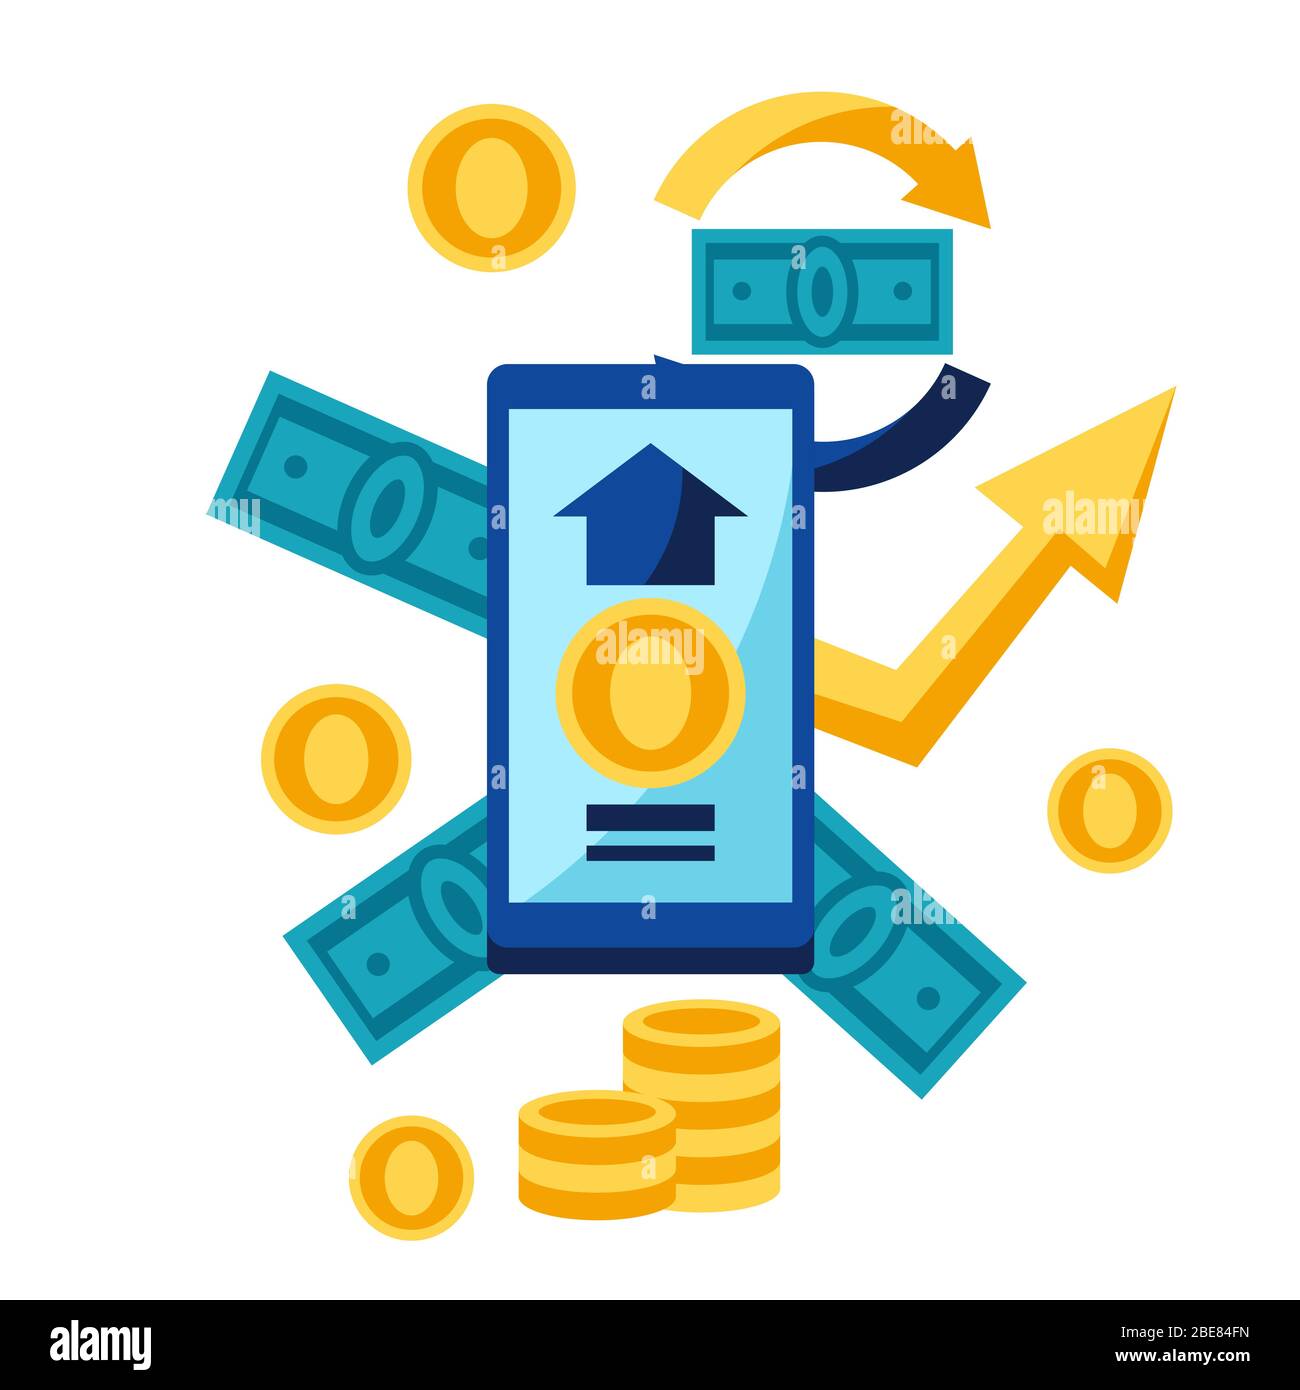 Illustration of phone and money. Stock Vector